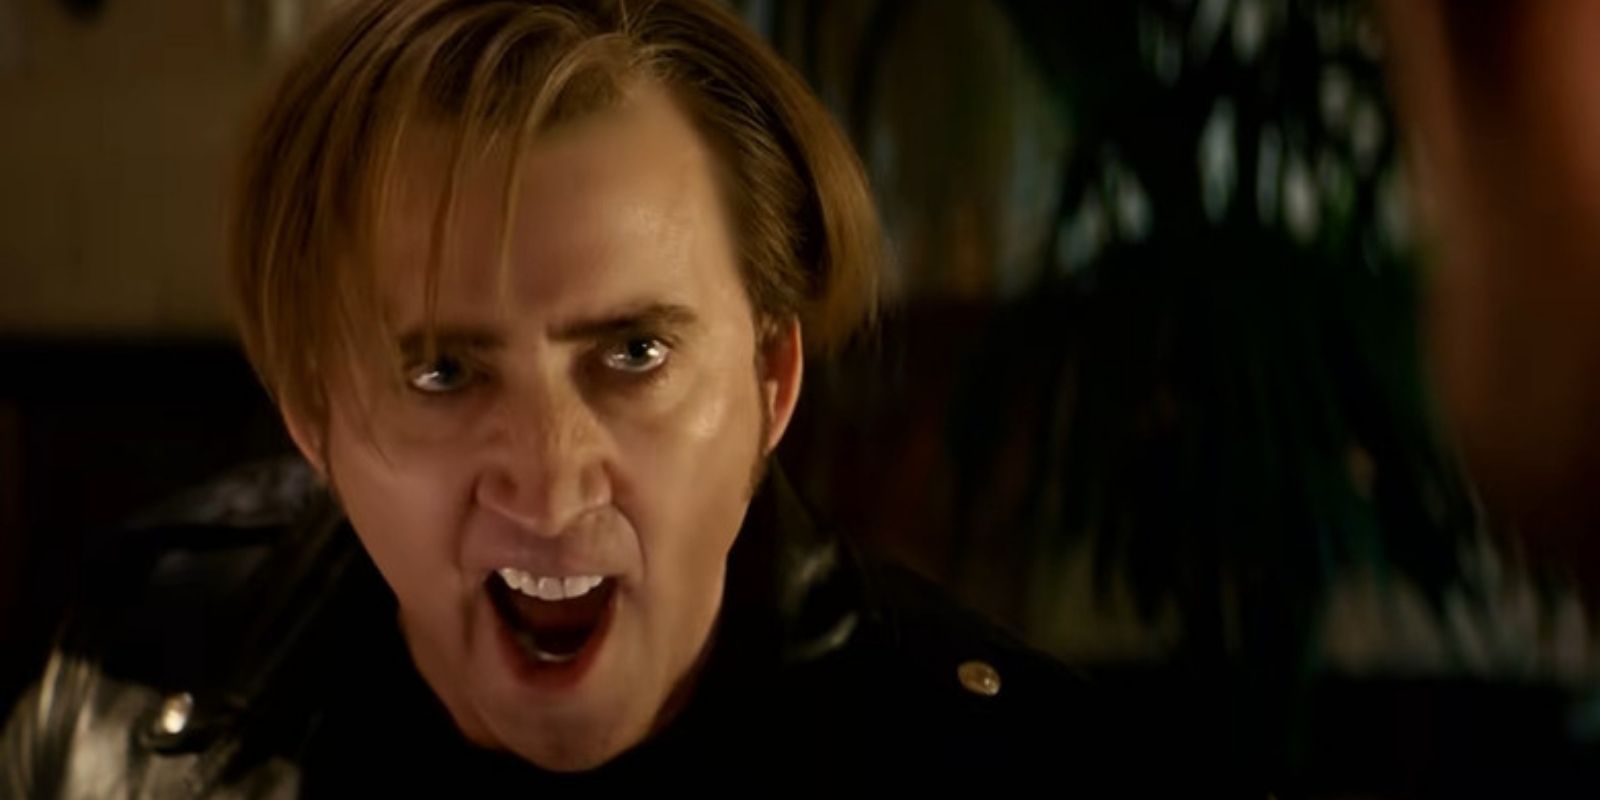 Nicolas Cage as Nicky Cage in Unbearable Weight of Massive Talent